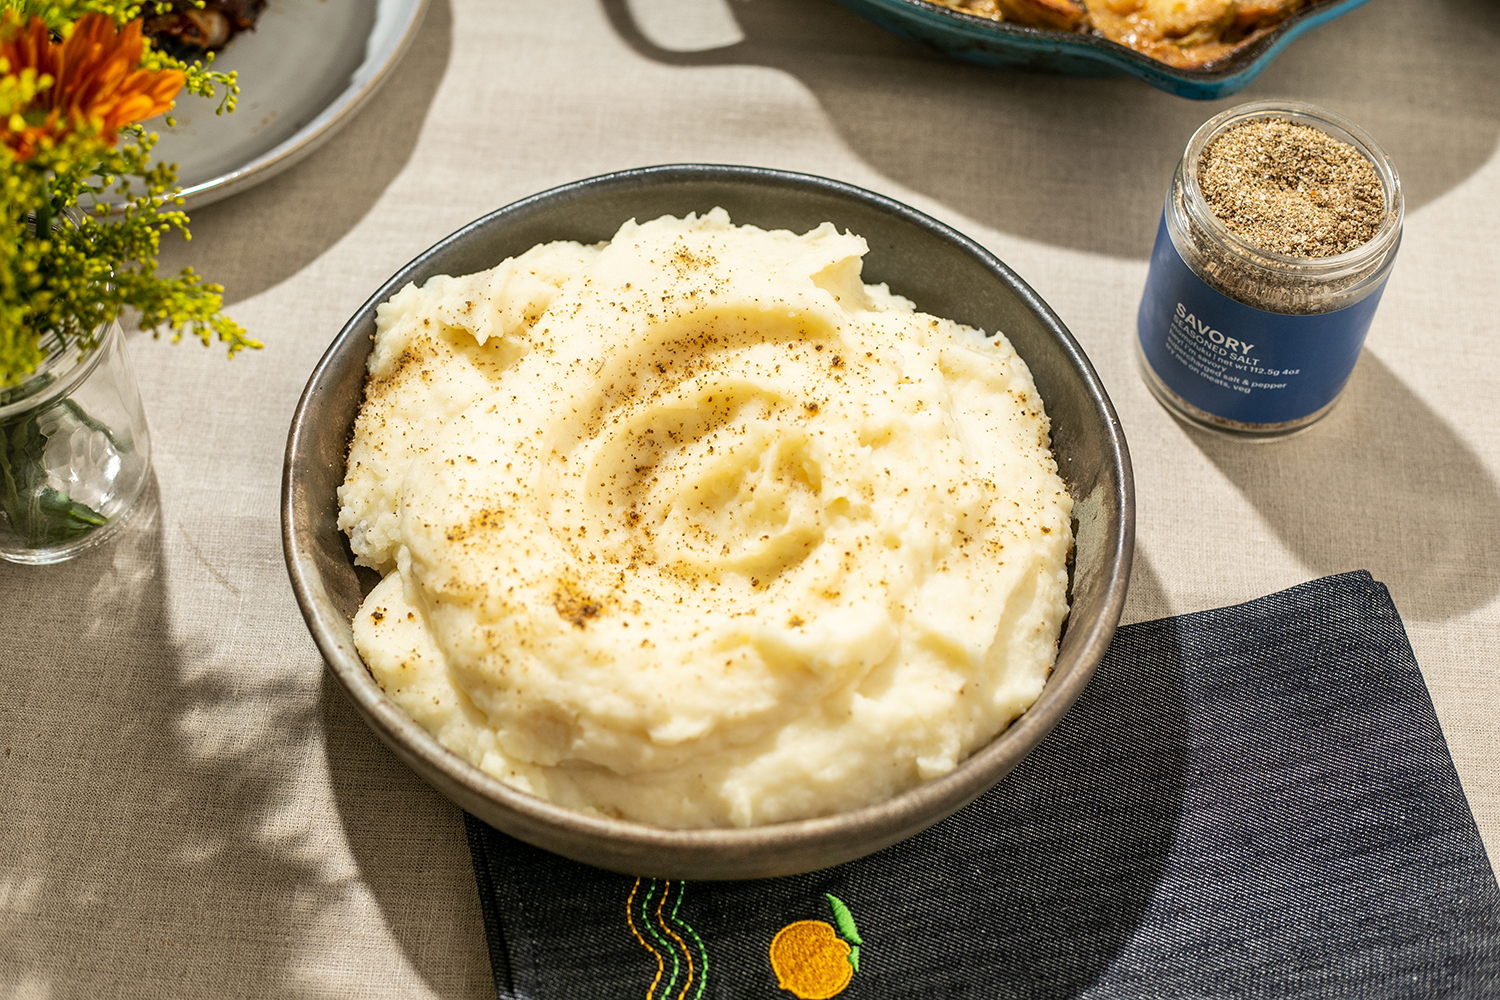 The Best Mashed Potatoes